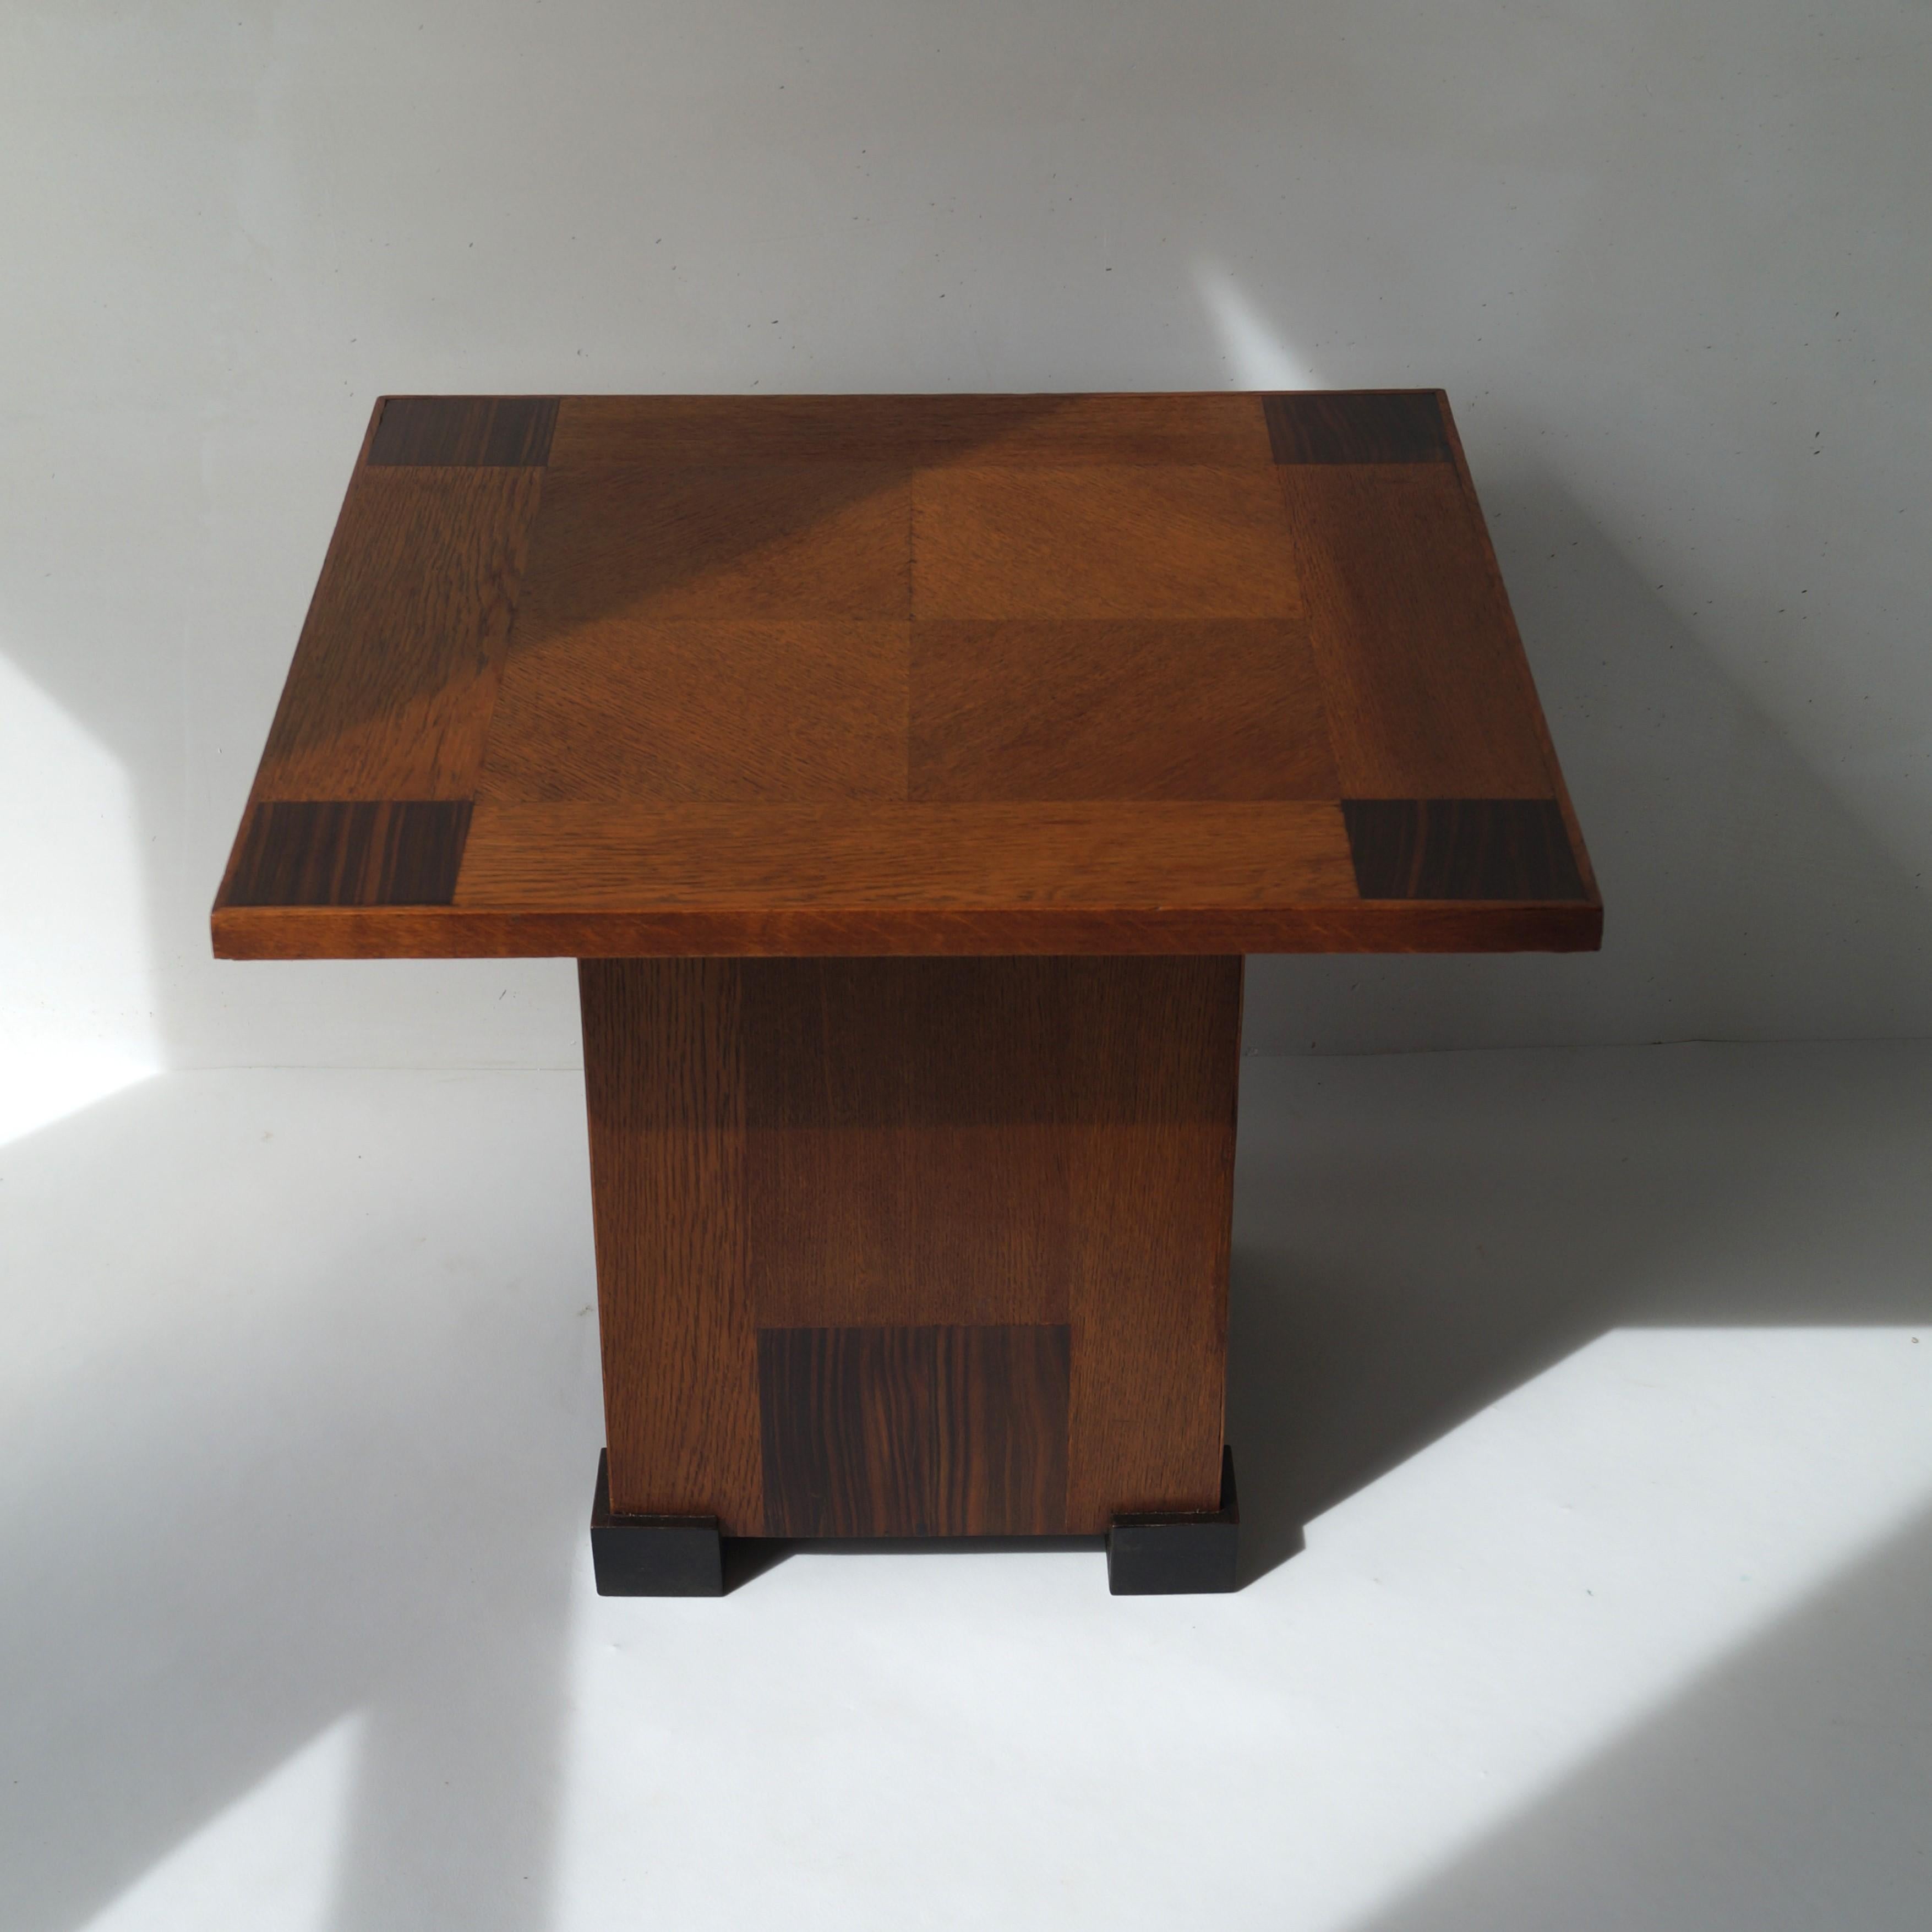 Rare modernist coffee table from the 1920s with an extraordinary checkered pattern table top design, which is repeated at the 4 sides of the base. Made from oak and coromandel (veneer). The style is reminiscent of designs by P.E.L. Izeren for De